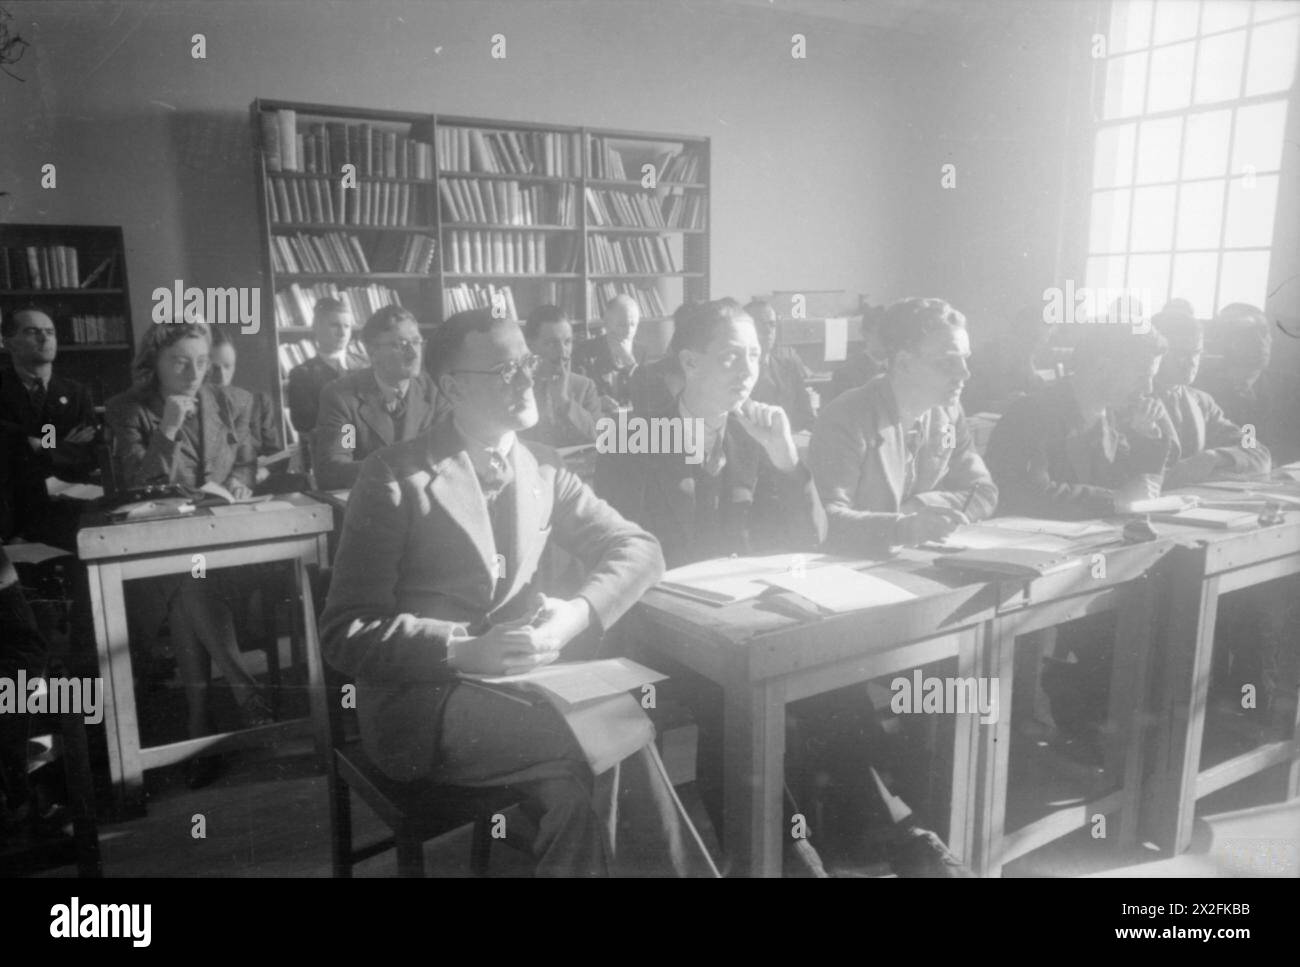 FROM THE SERVICES TO SCHOOLMASTERING: RE-TRAINING AT GOLDSMITH'S COLLEGE, LONDON UNIVERSITY, NOTTINGHAM, ENGLAND, 1944 - A class of ex-servicemen training to be teachers at Goldsmiths College (based at Nottingham University since the outbreak of war) listen to a lecture on English composition. The class is led by Dr Lewis, the Vice-Principal of Goldsmiths College (not pictured) Stock Photo